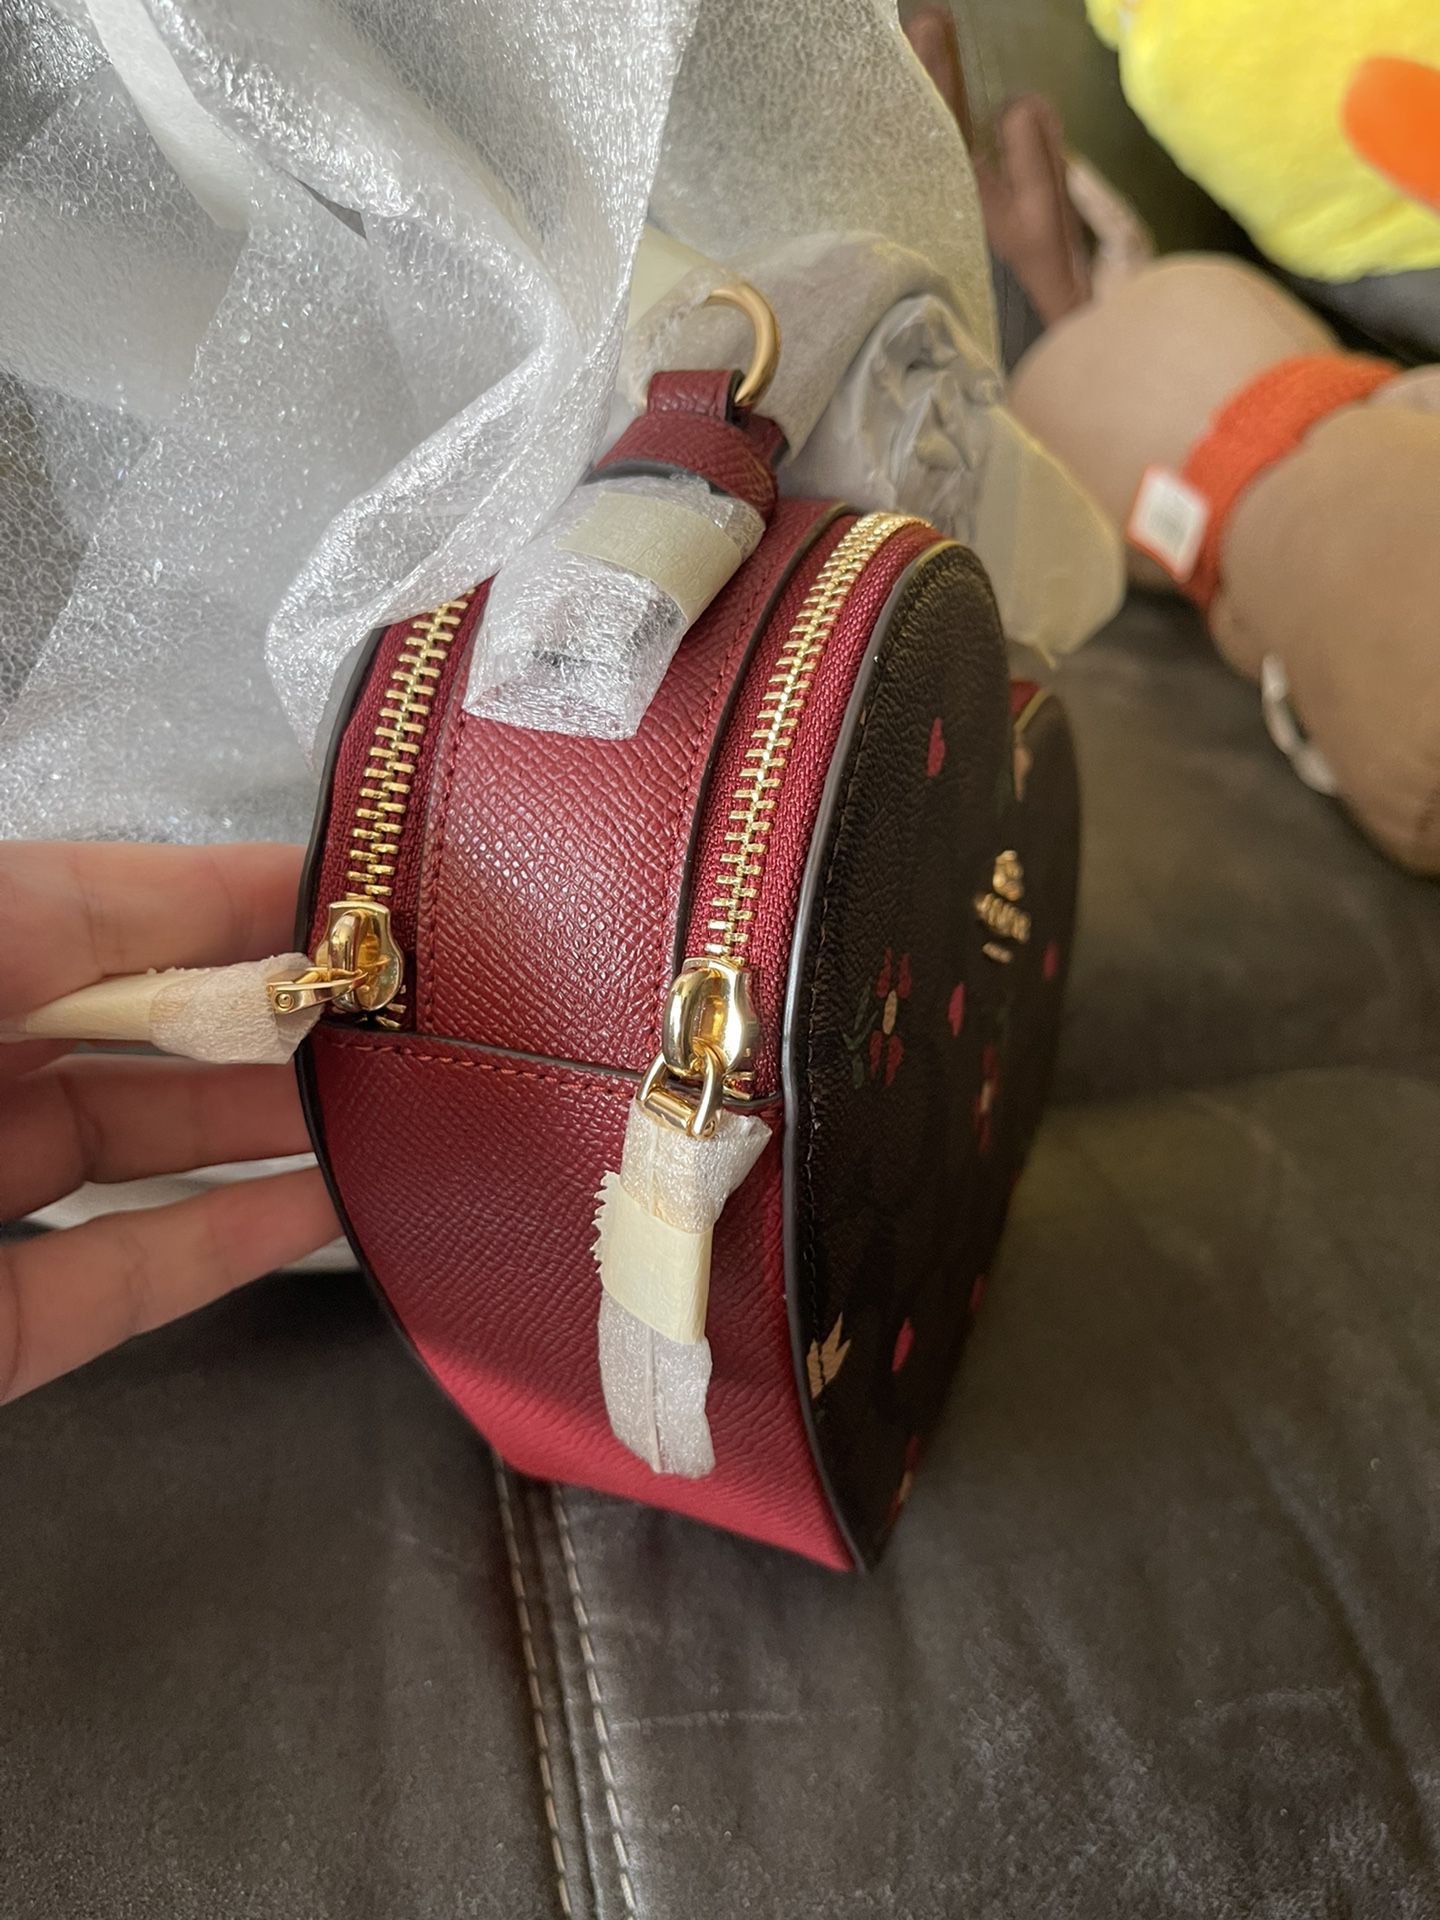 Coach Heart Crossbody Bag Purse for Sale in Simi Valley, CA - OfferUp